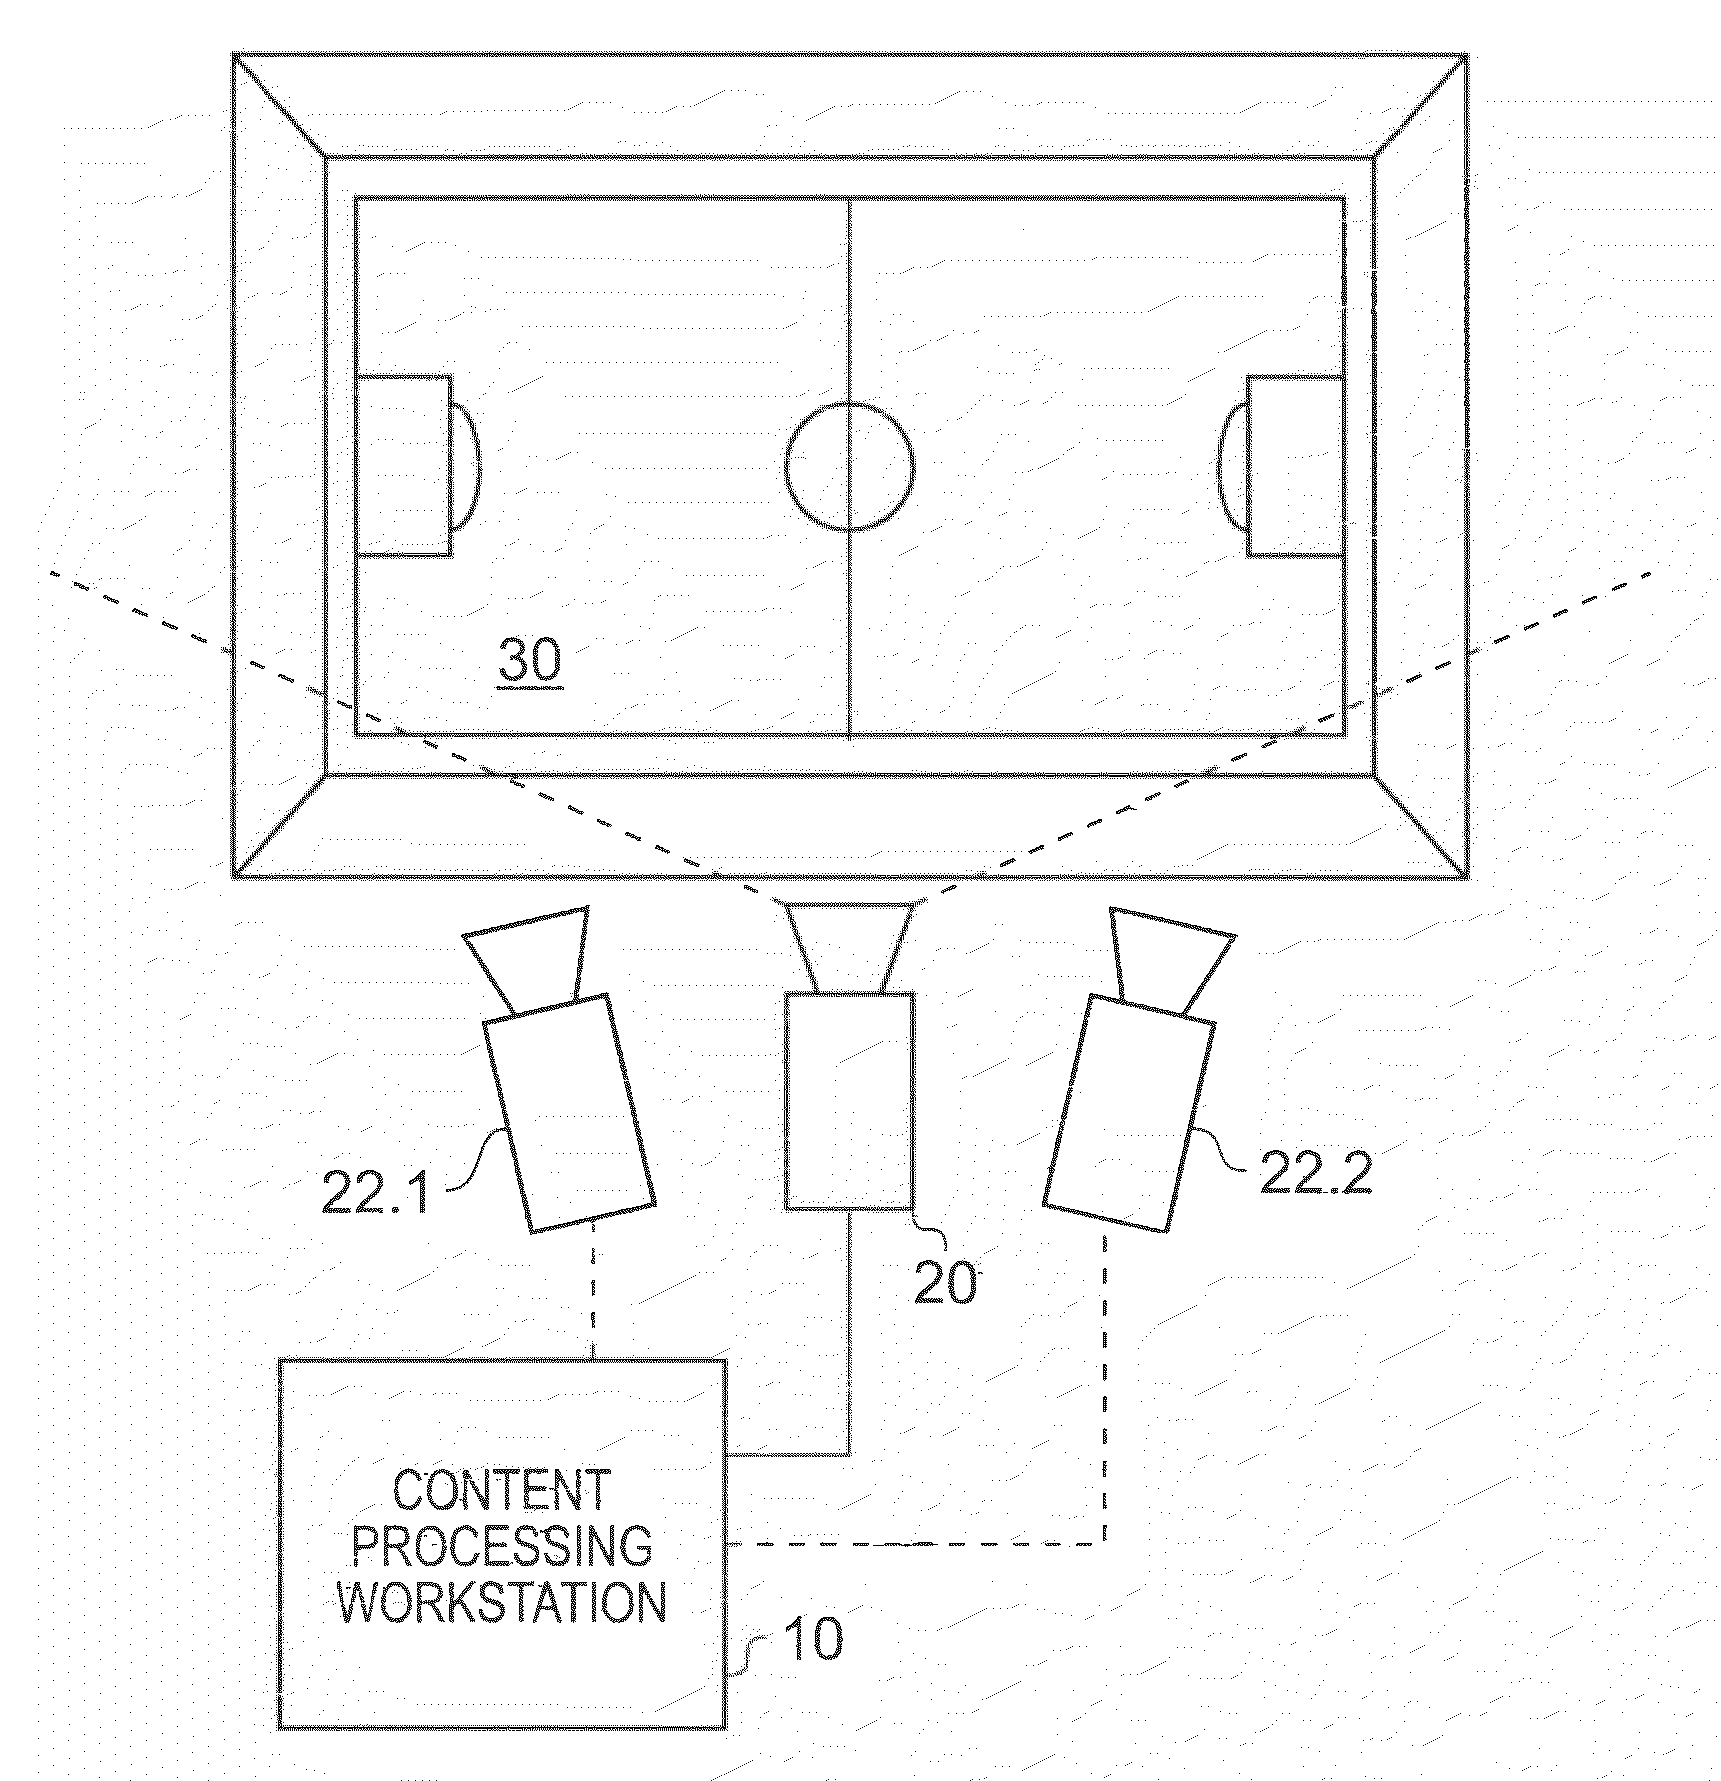 Apparatus and method of object tracking